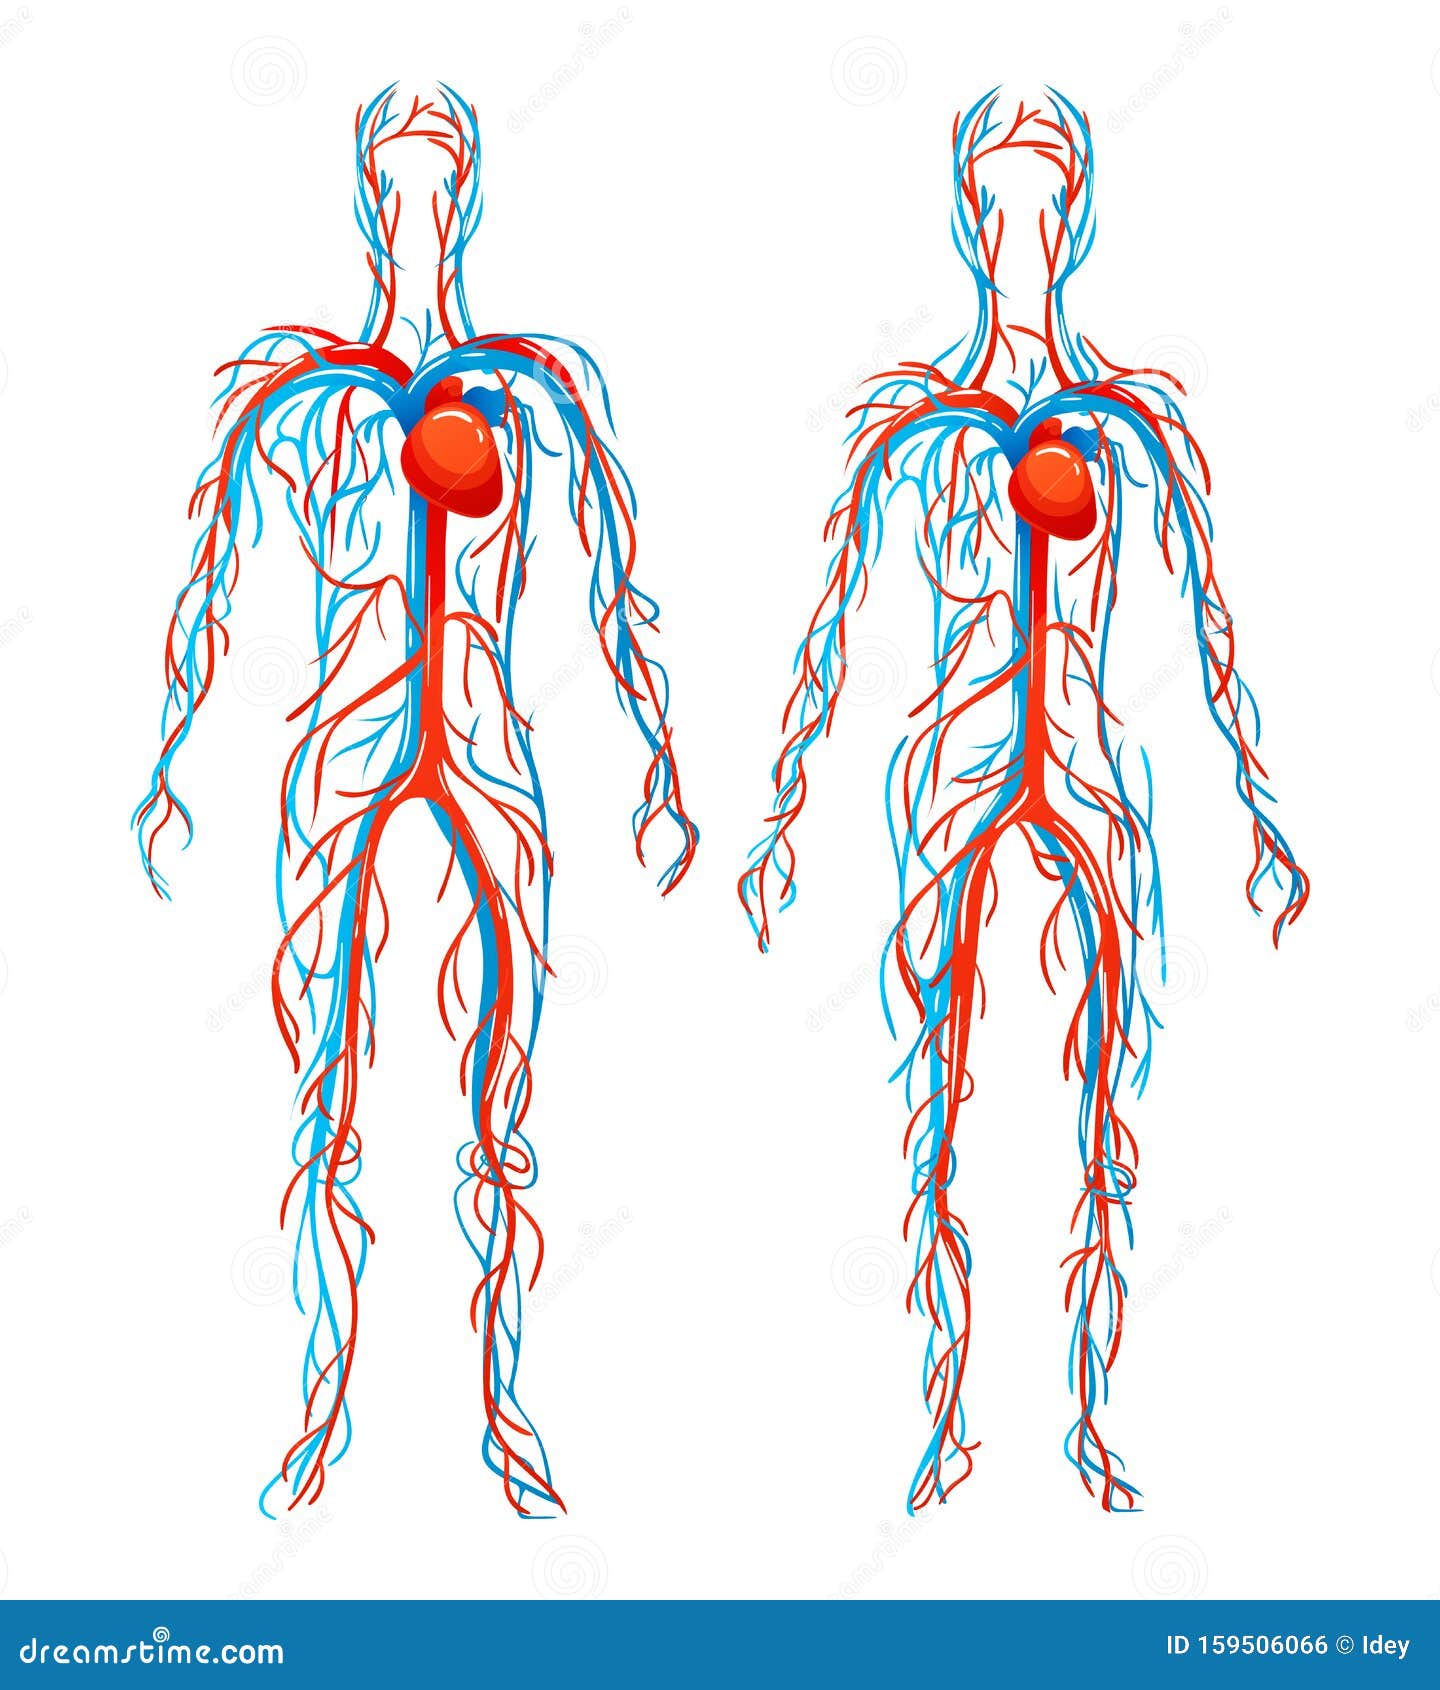 anatomical structure human bodies. blood vessels with arteries, veins.